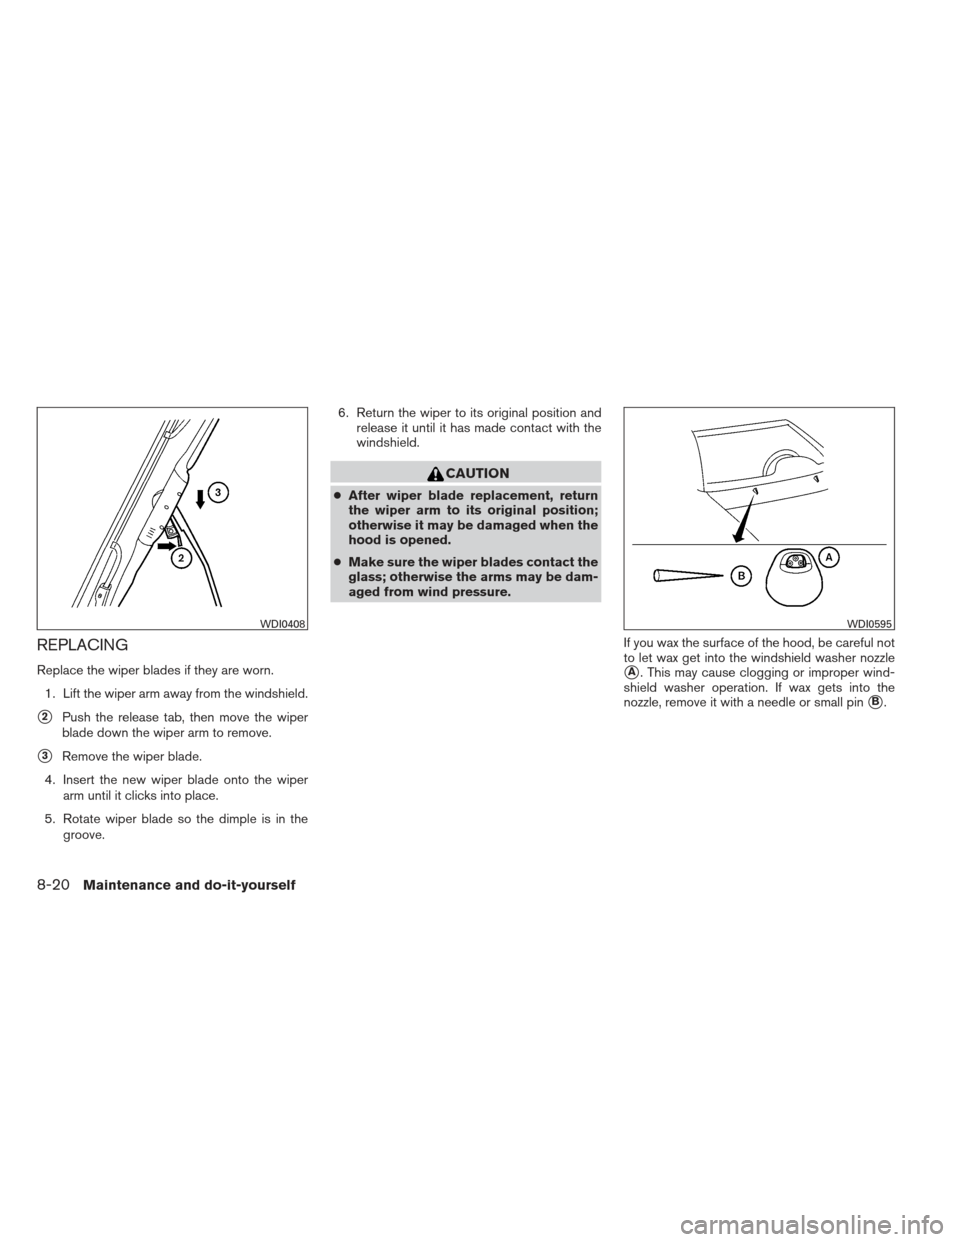 NISSAN XTERRA 2012 N50 / 2.G Owners Guide REPLACING
Replace the wiper blades if they are worn.1. Lift the wiper arm away from the windshield.
2Push the release tab, then move the wiper
blade down the wiper arm to remove.
3Remove the wiper b